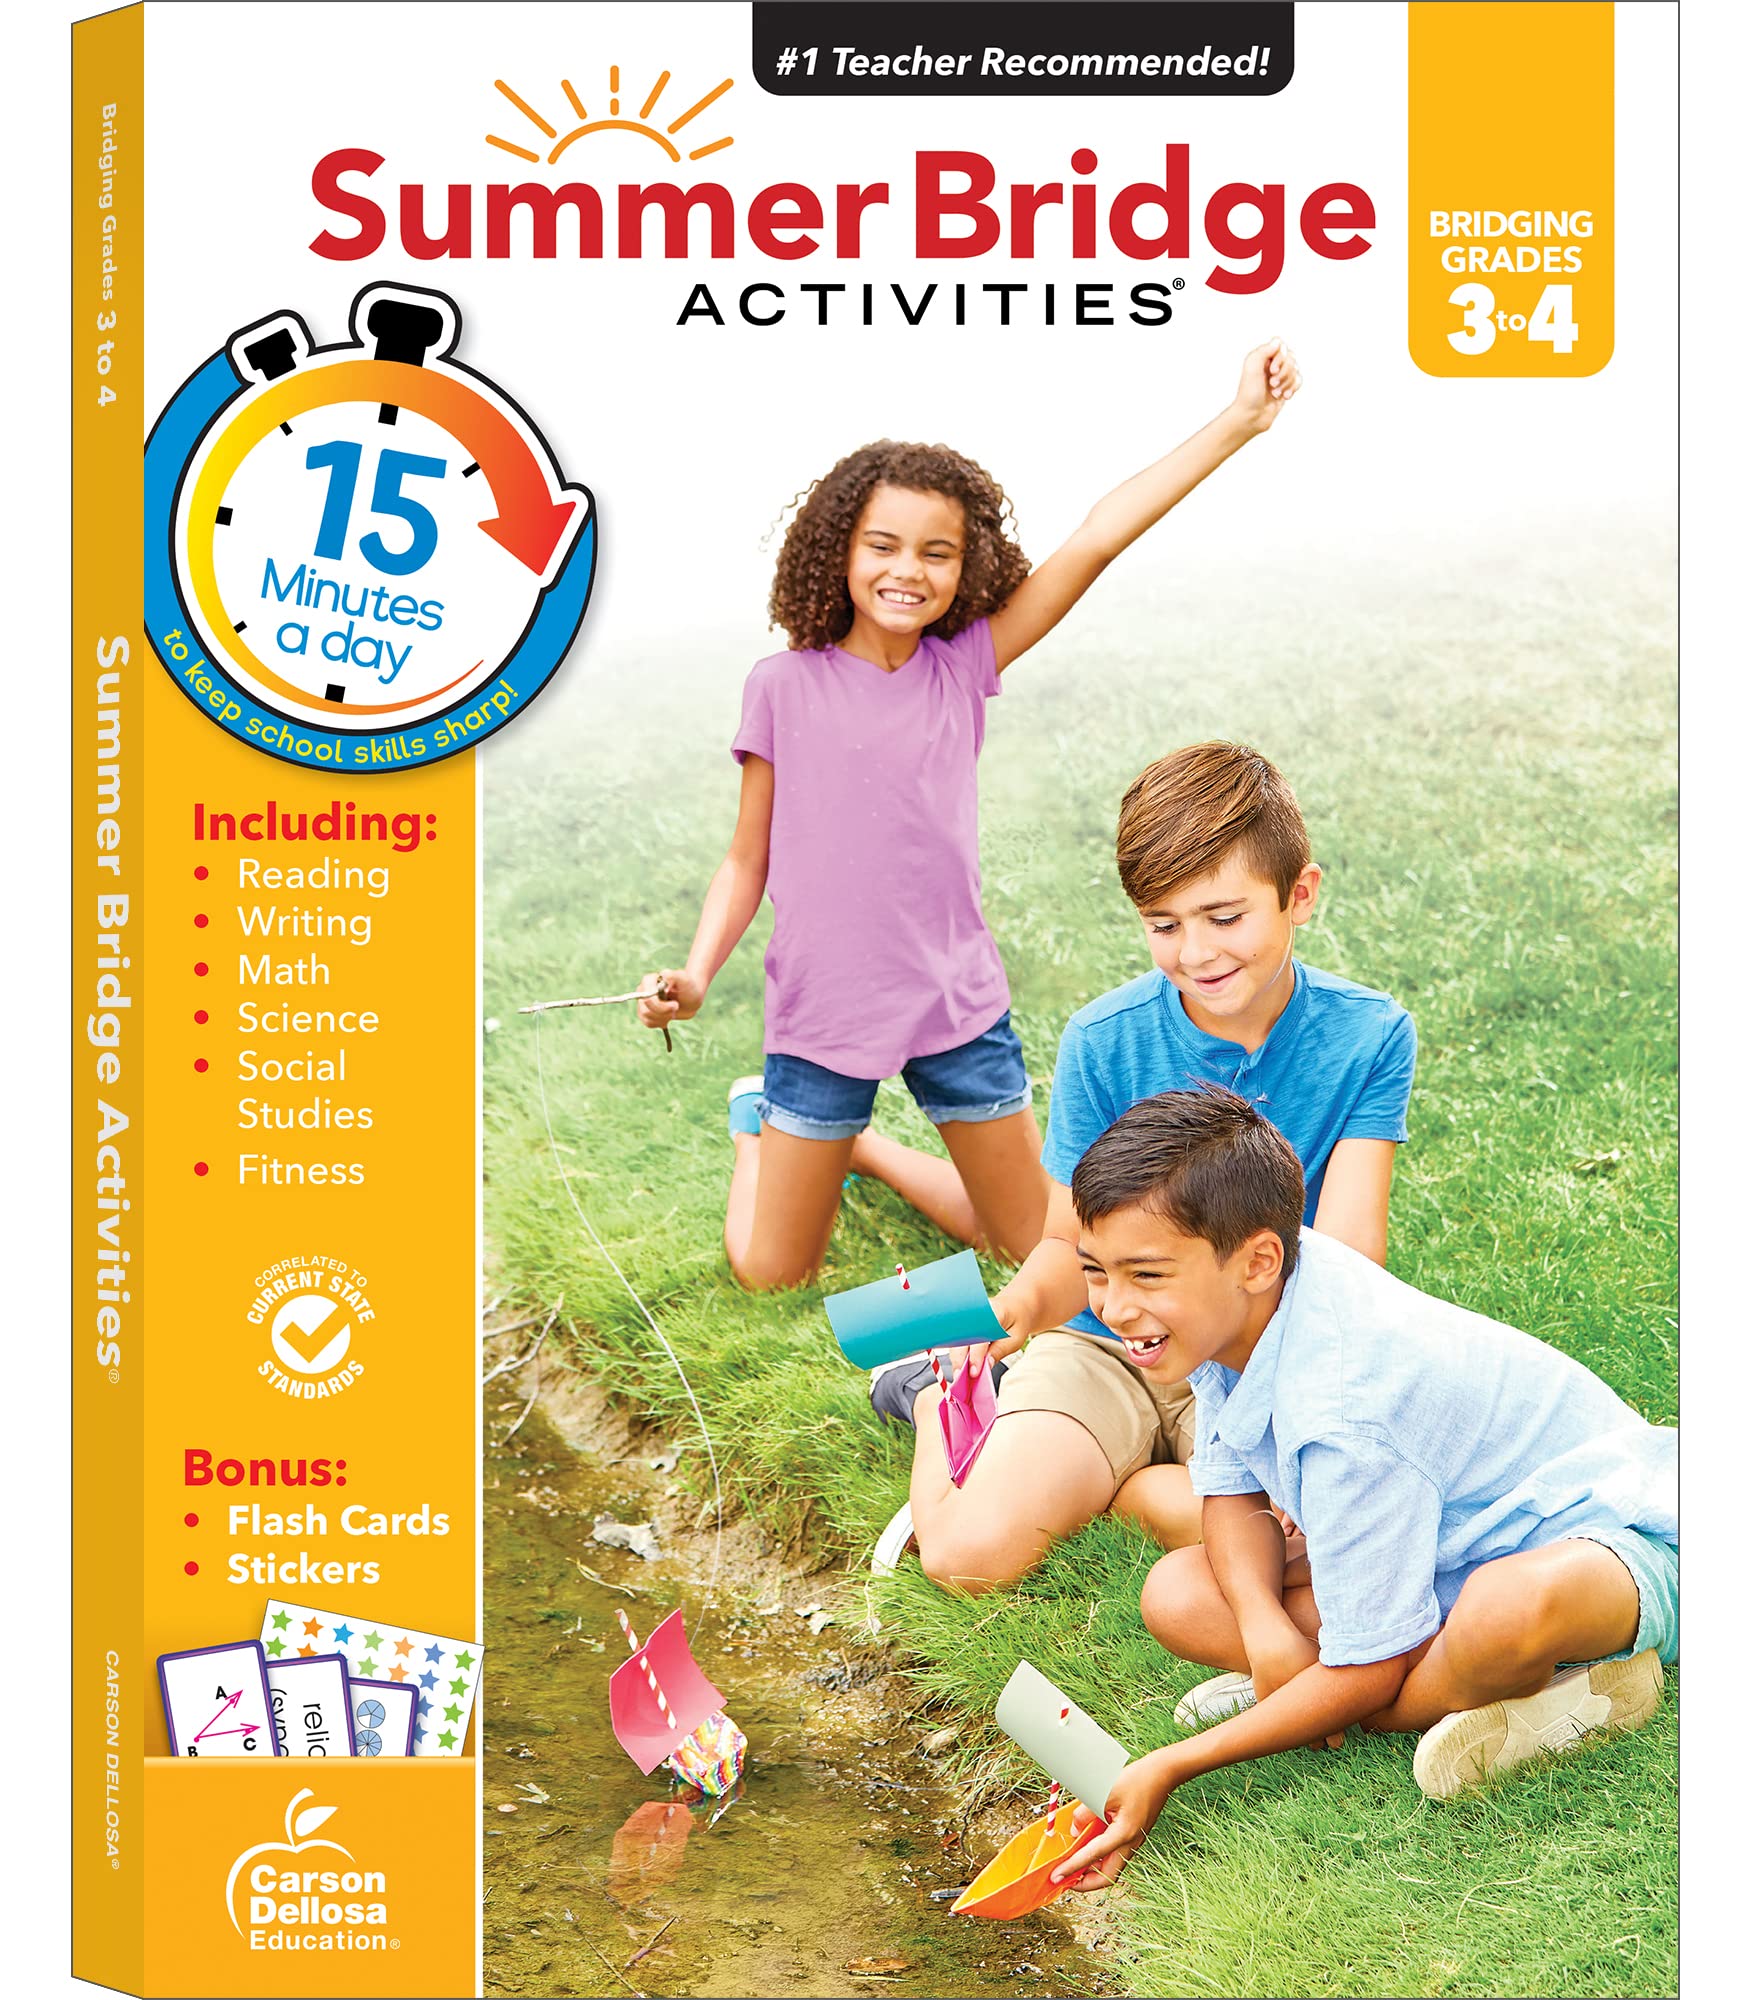 Book Cover Summer Bridge Activities 3rd to 4th Grade Workbook, Math, Reading Comprehension, Writing, Science, Social Studies, Fitness Summer Learning Activities, 4th Grade Workbooks All Subjects With Flash Cards